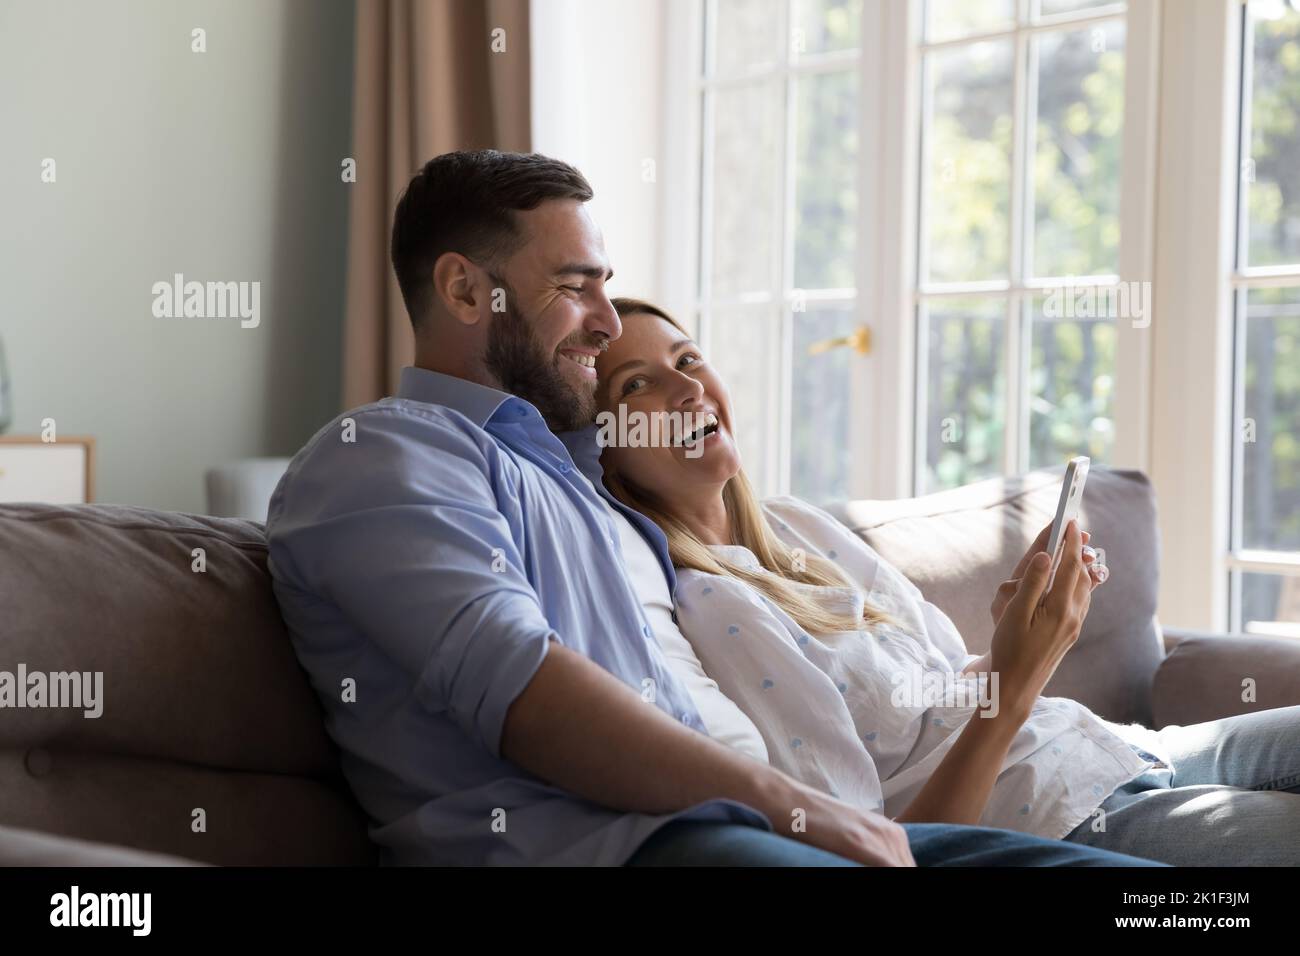 Happy cheerful married couple relaxing, hugging on couch at home Stock Photo